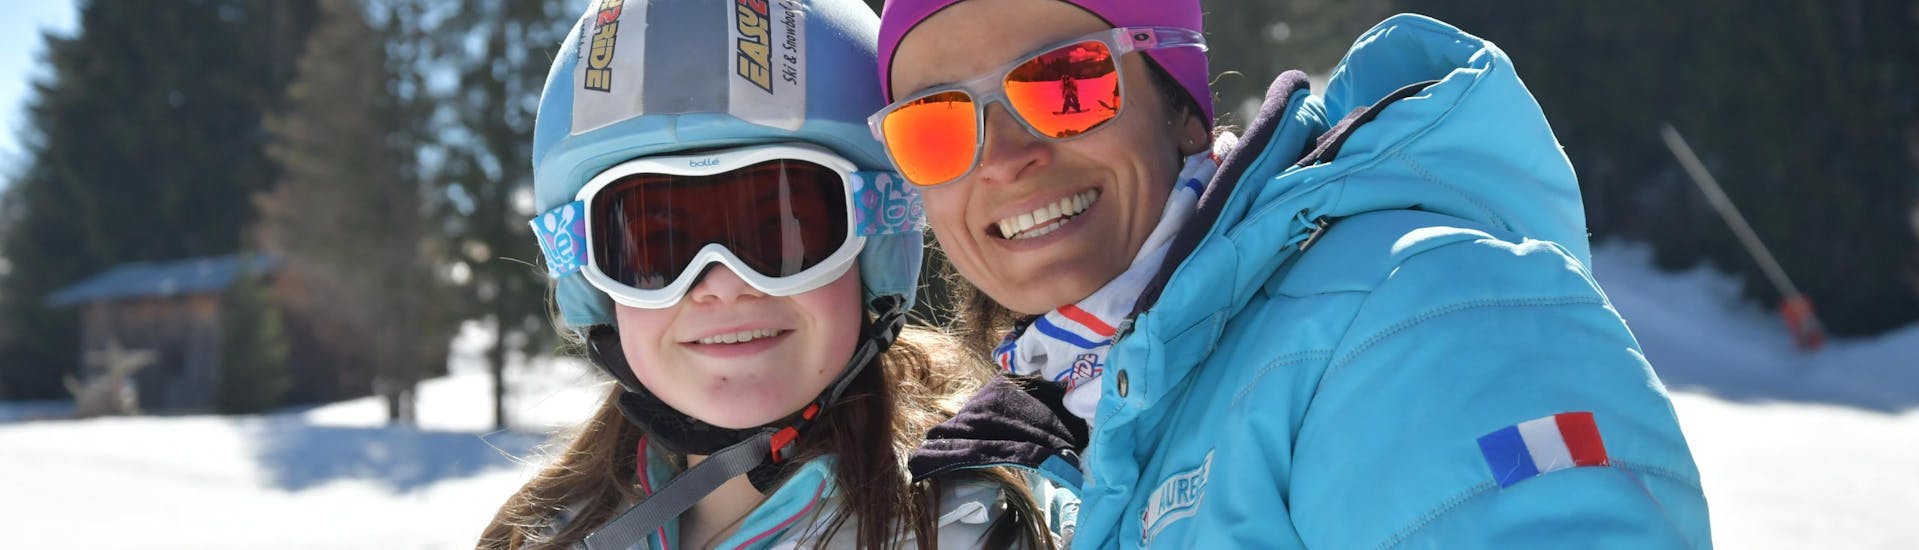 Private Ski Lessons for Kids & Teens (from 5 y.) of All Levels.